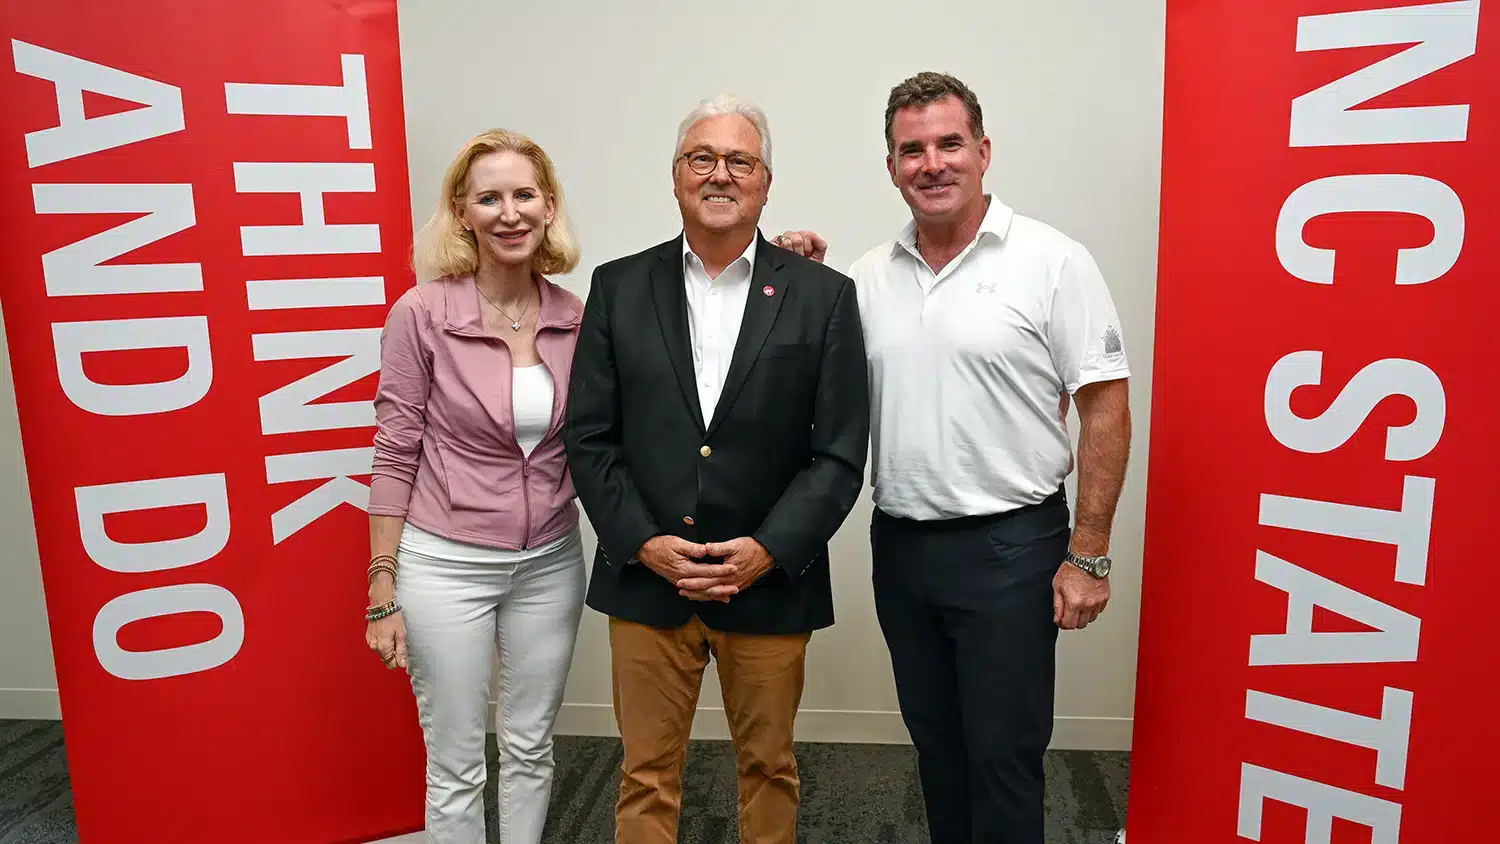 Chancellor Woodson (center) with Under Armour Founder, Executive Chairman and Brand Chief Kevin Plank (right) and President and CEO Stephanie Linnartz (left).